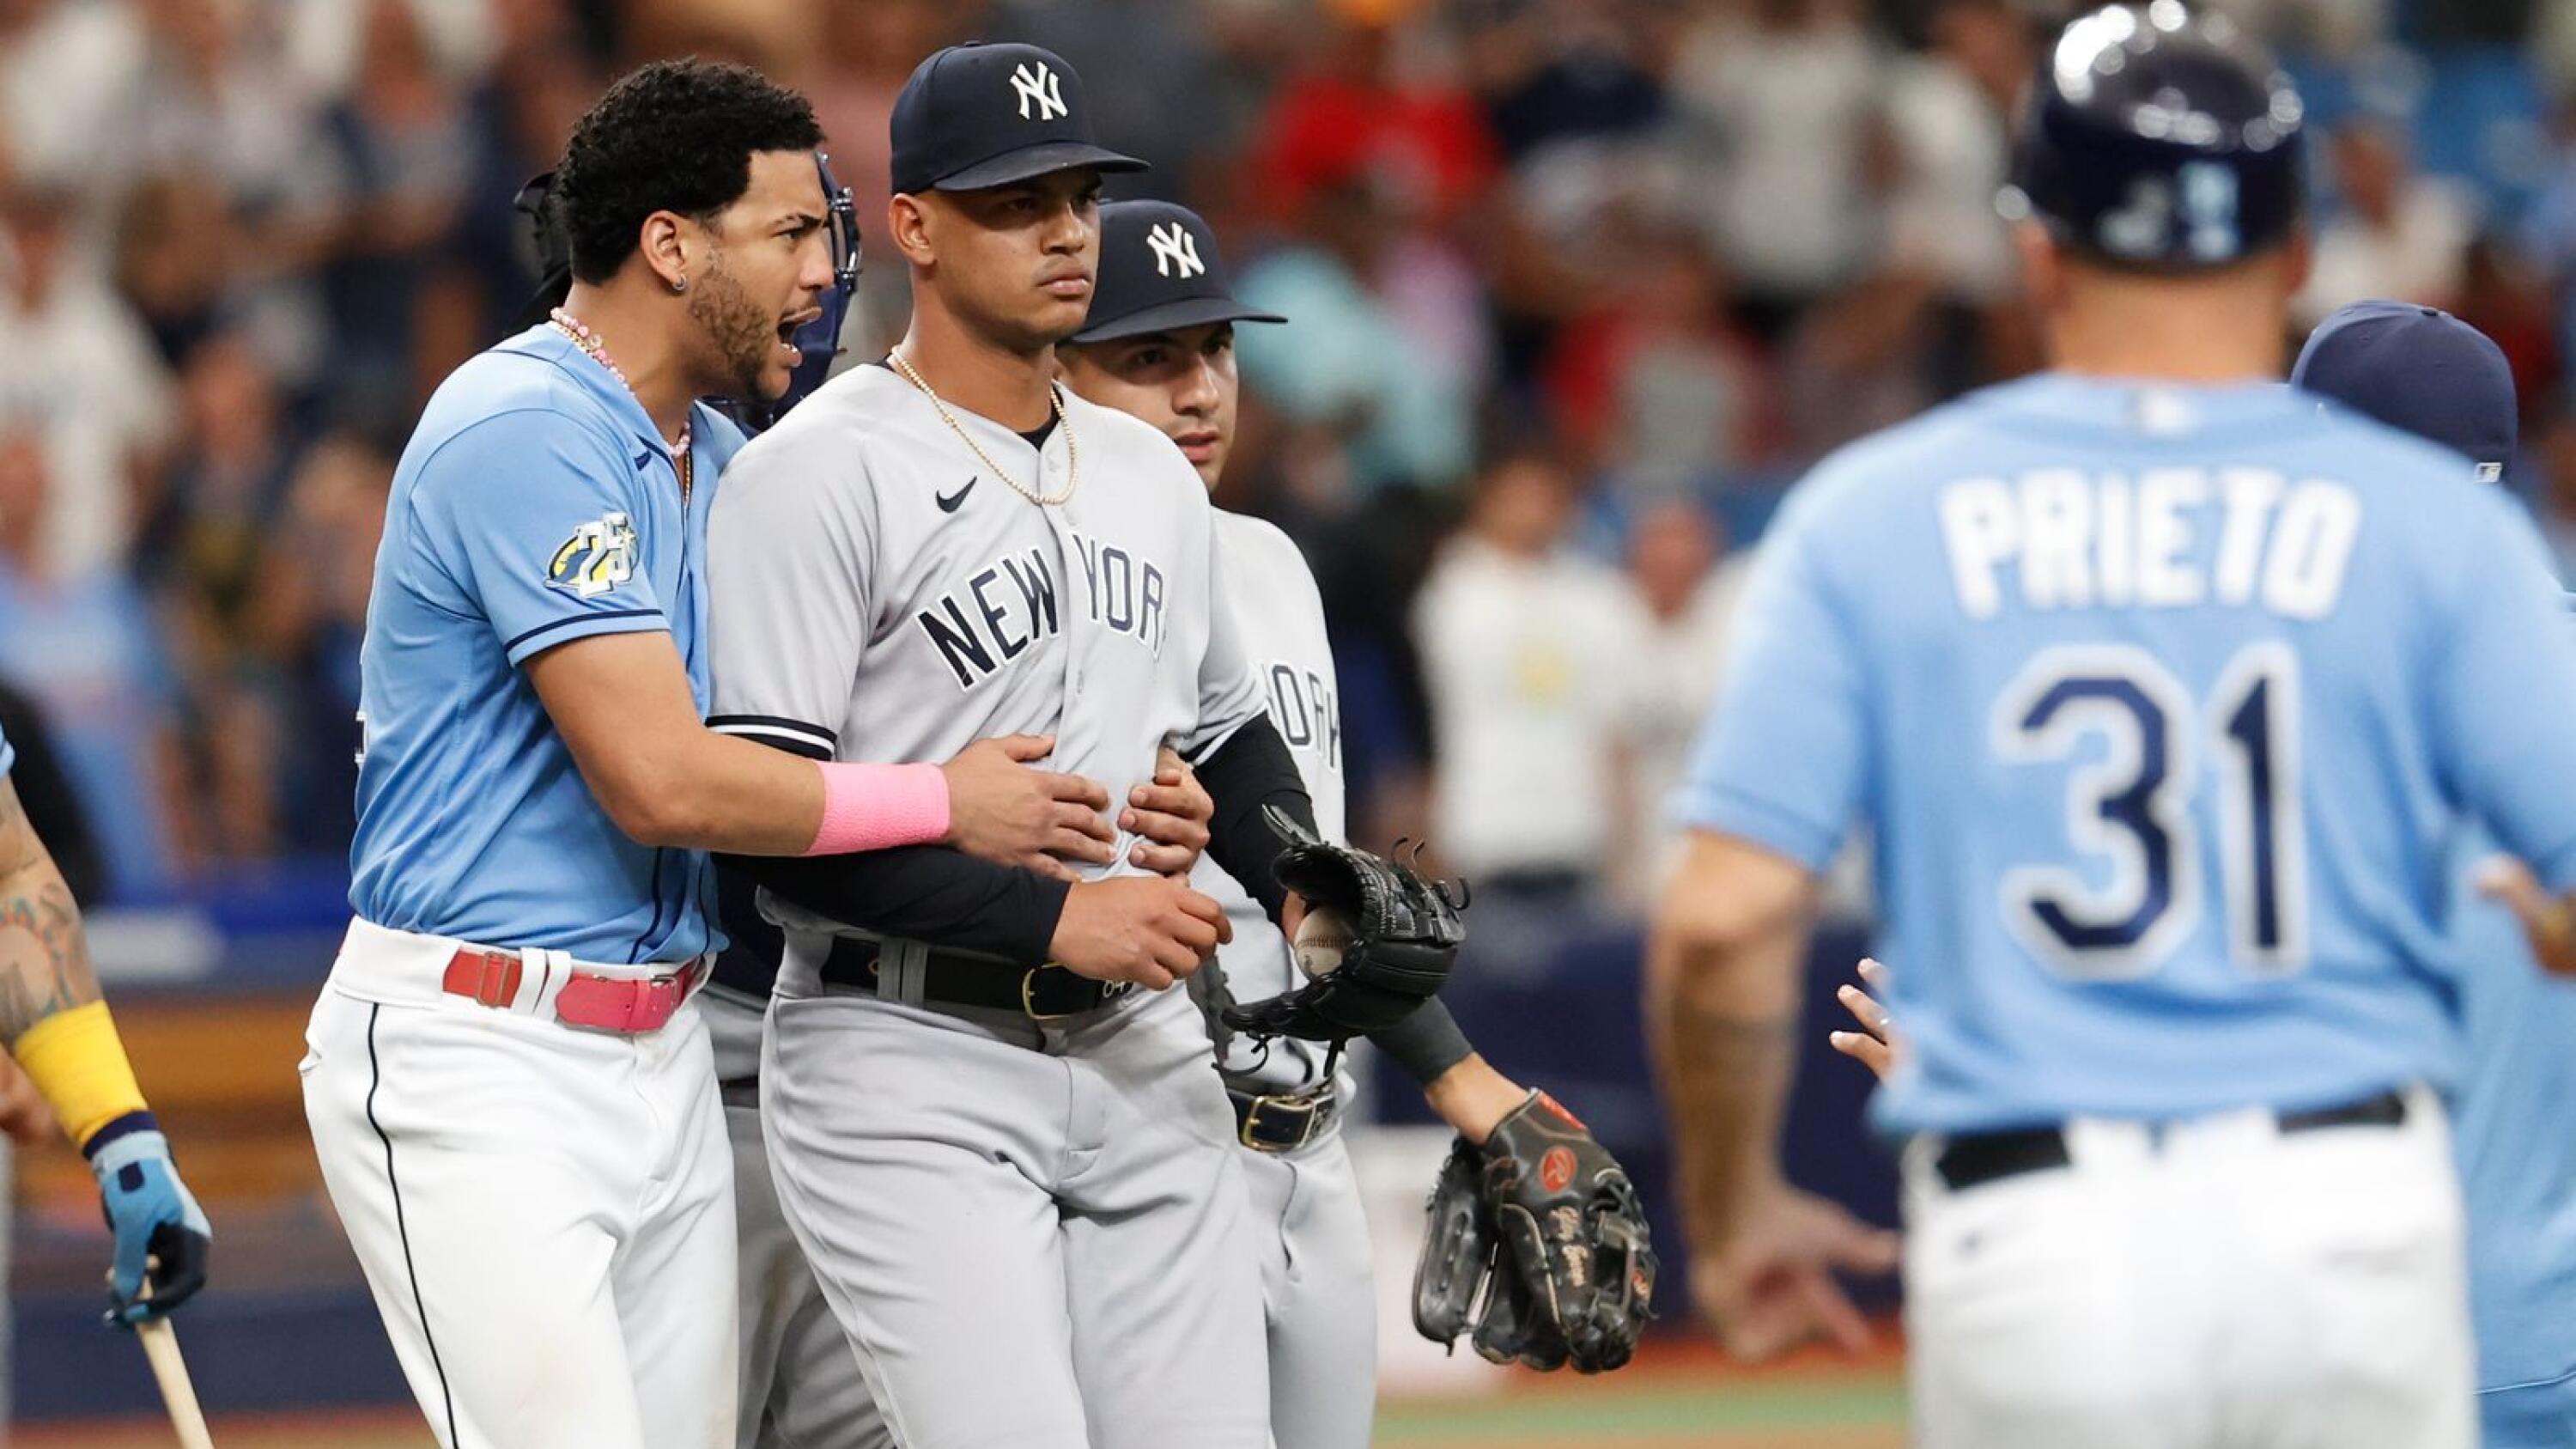 Lowe's 4 RBIs lead Rays over Yankees 7-4 as 5 batters hit